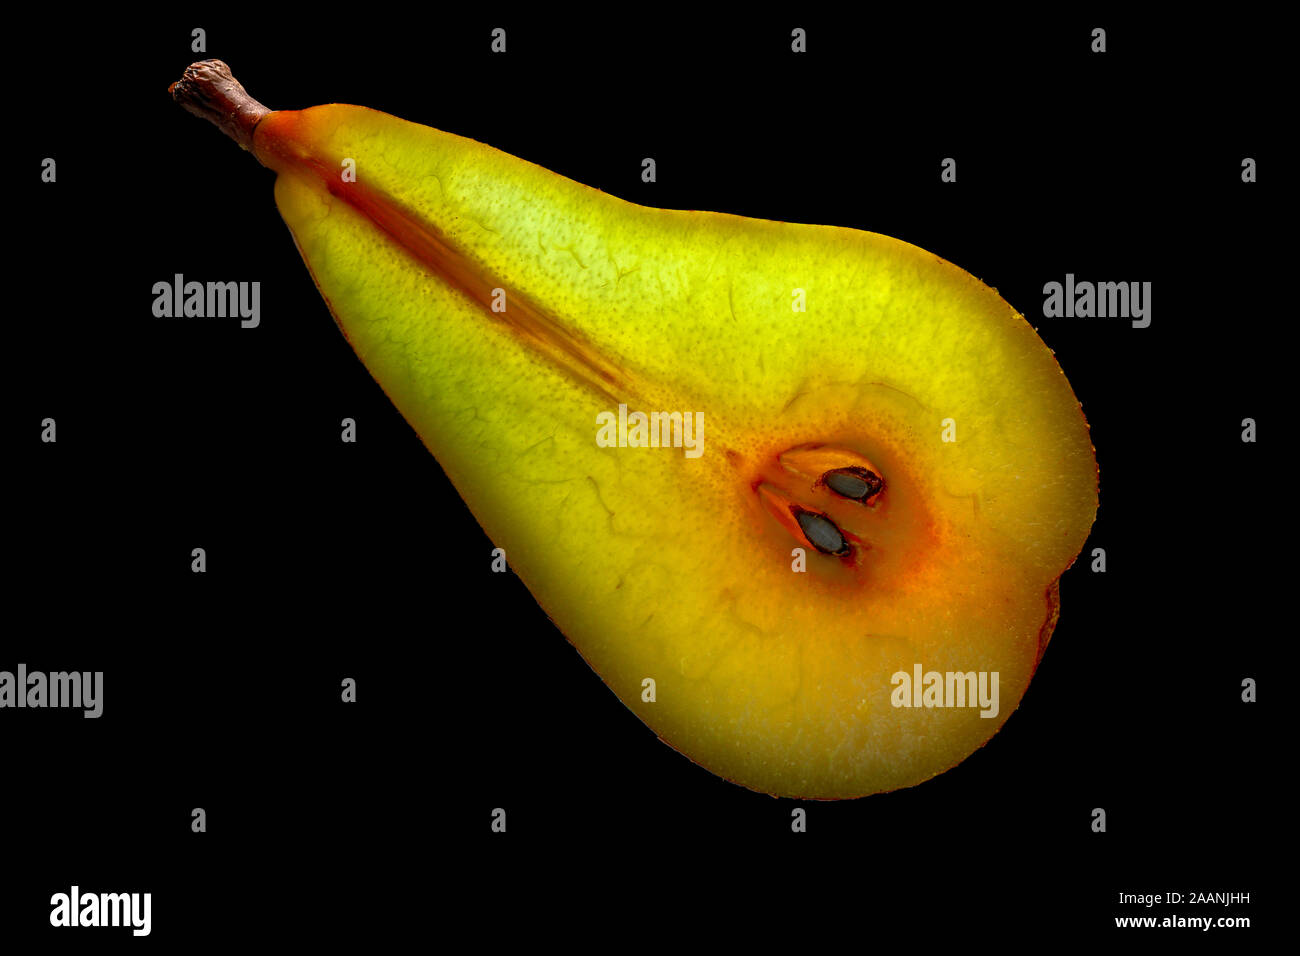 Slice of Pear with Backlight Isolated on Black Background Stock Photo